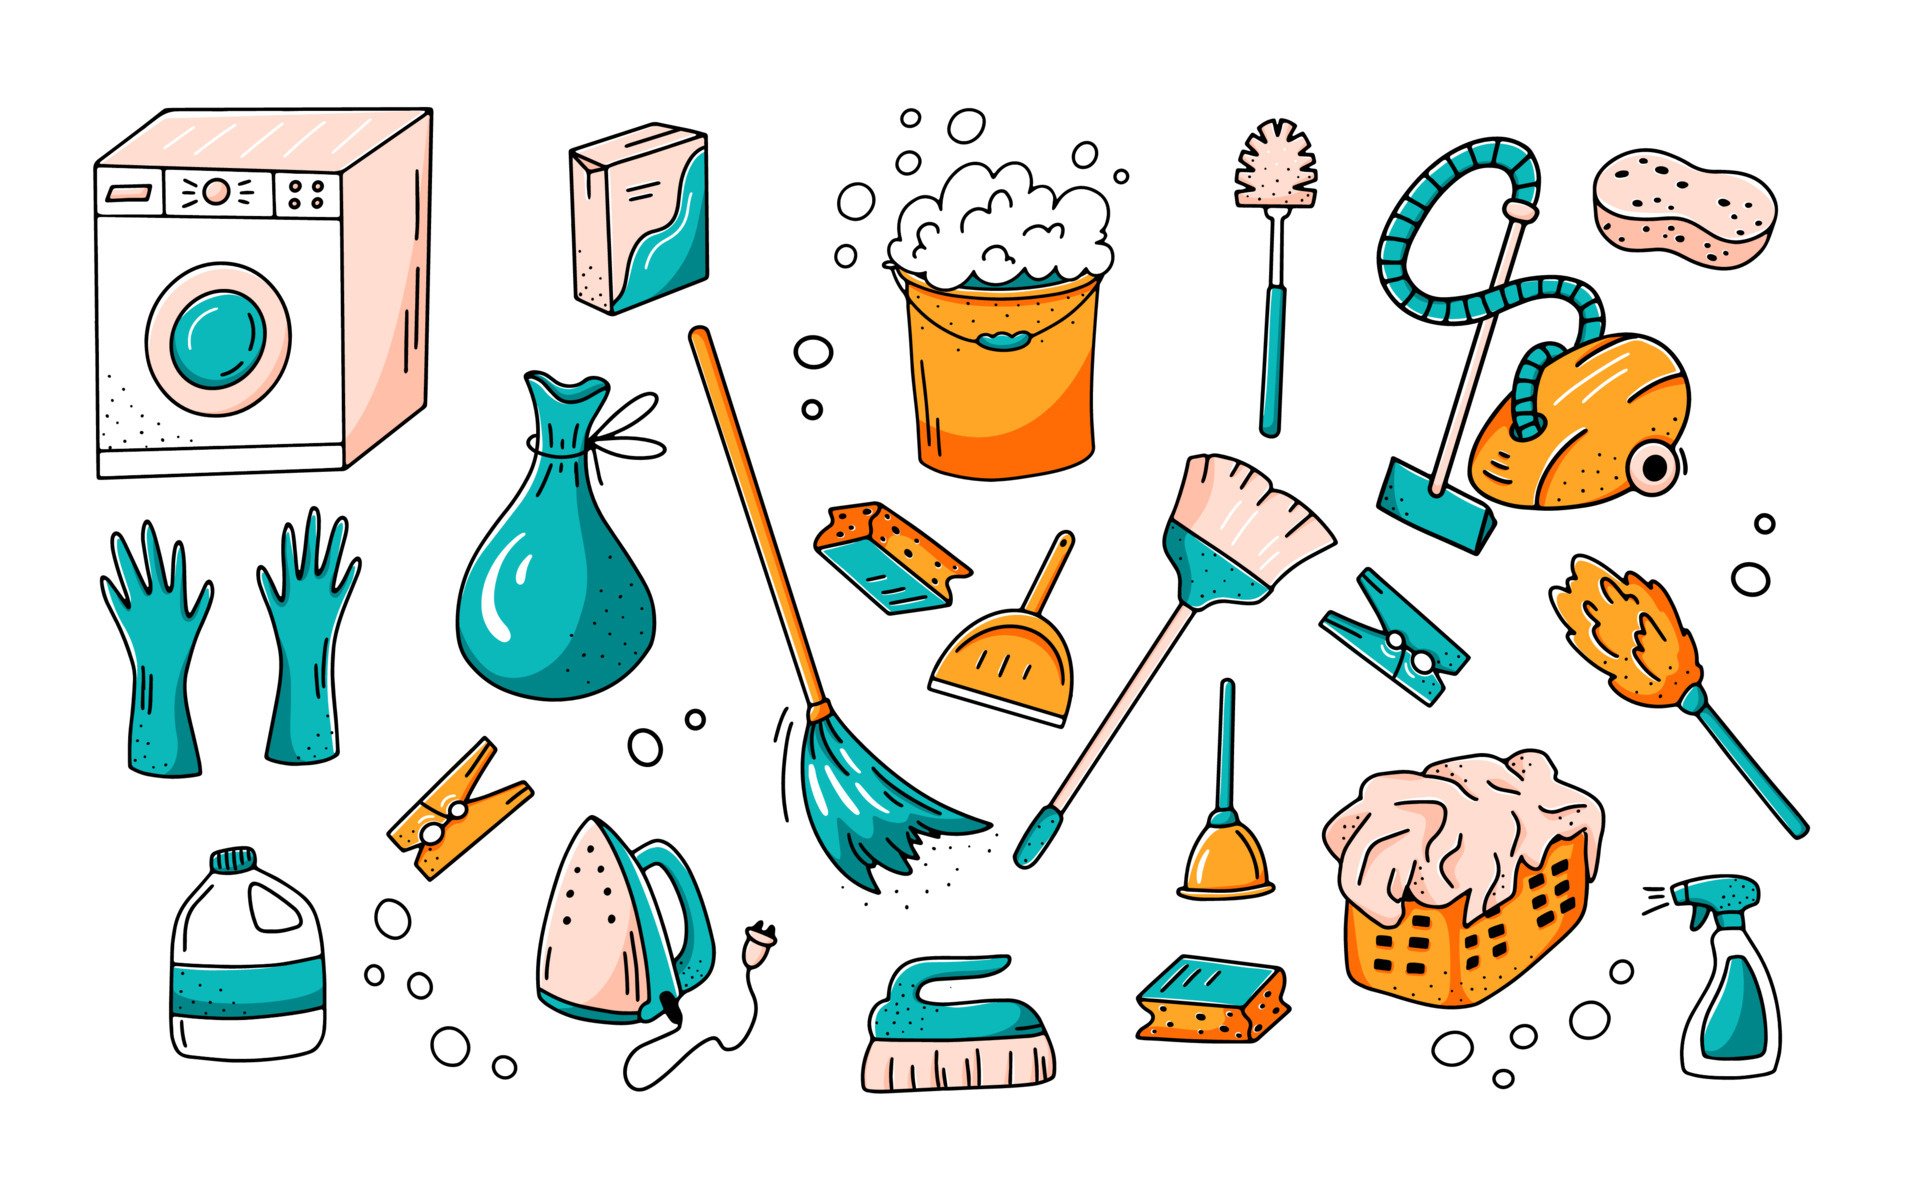 https://static.vecteezy.com/system/resources/previews/005/571/602/original/set-of-colored-doodle-elements-cleaning-service-collection-of-icons-in-hand-drawn-style-illustration-vector.jpg